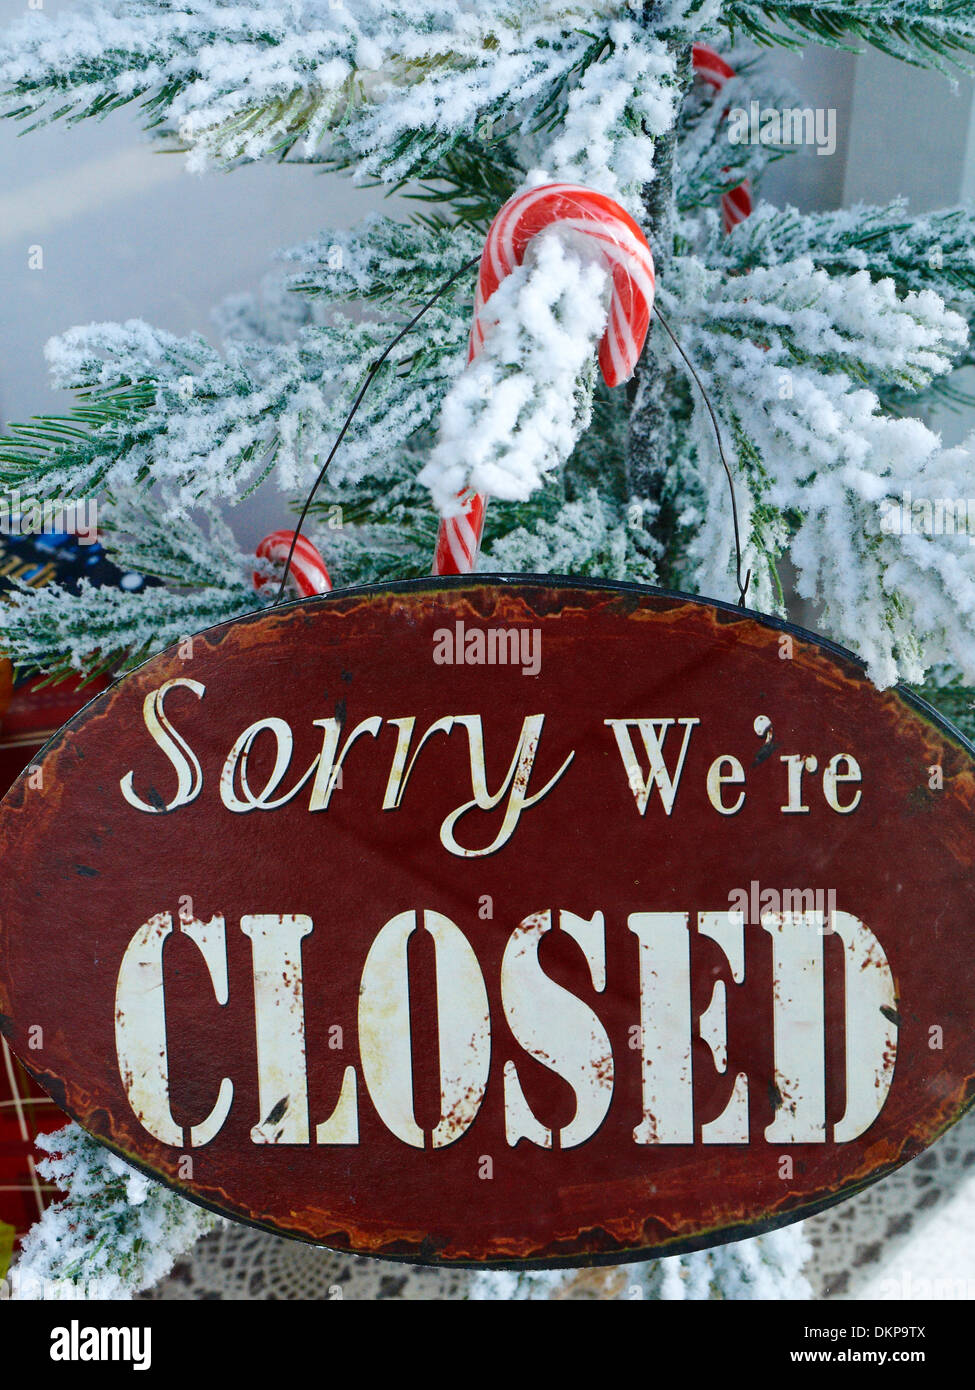 christmas-sorry-we-re-closed-sign-in-shop-window-uk-stock-photo-63800266-alamy